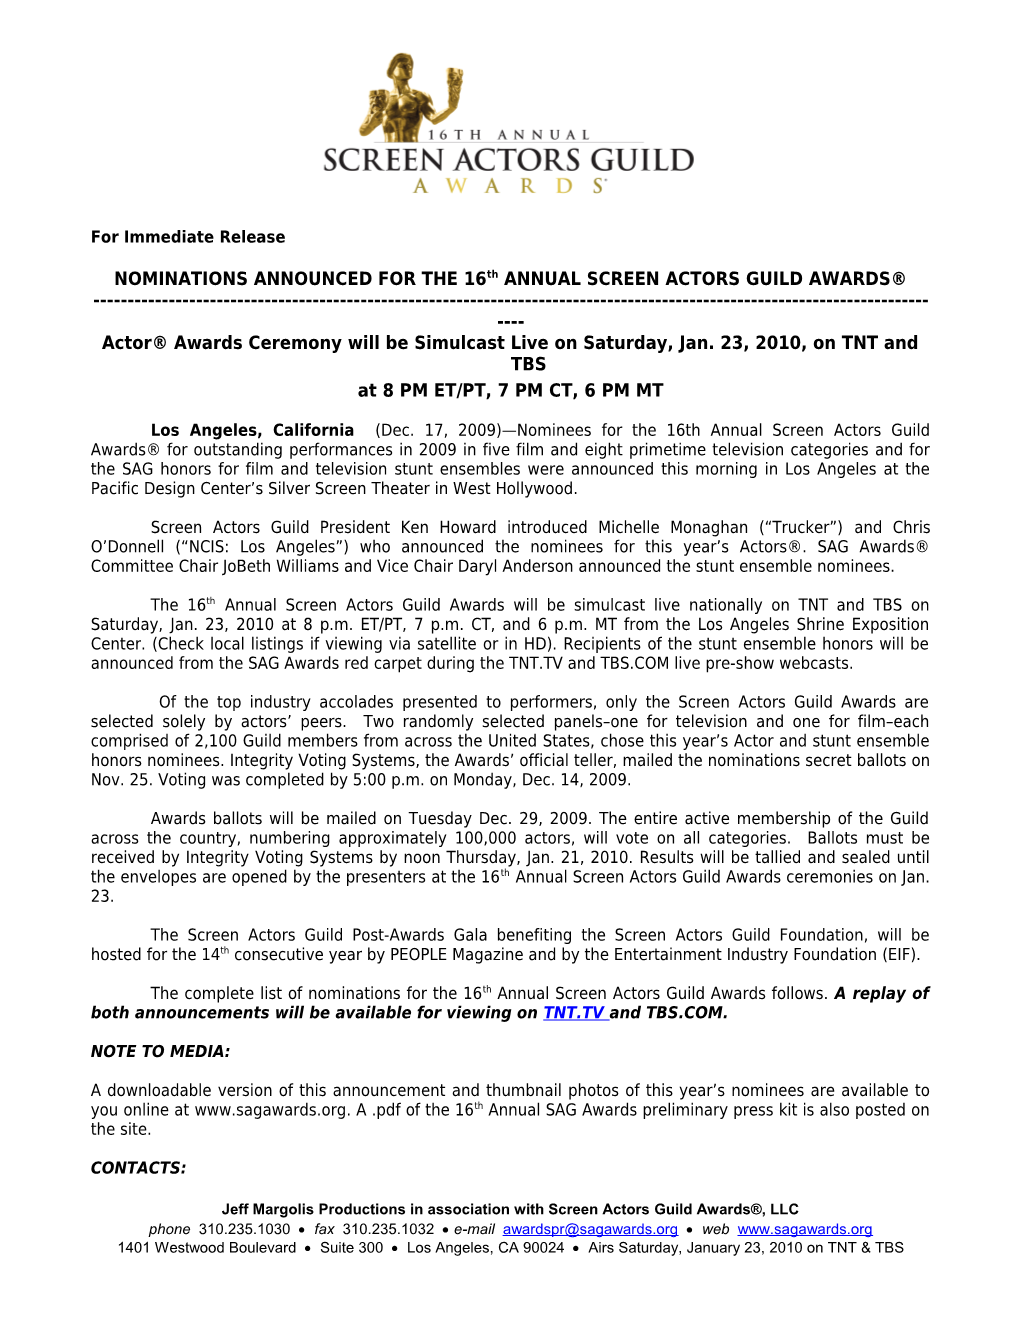 NOMINATIONS ANNOUNCED for the 16Th ANNUAL SCREEN ACTORS GUILD AWARDS